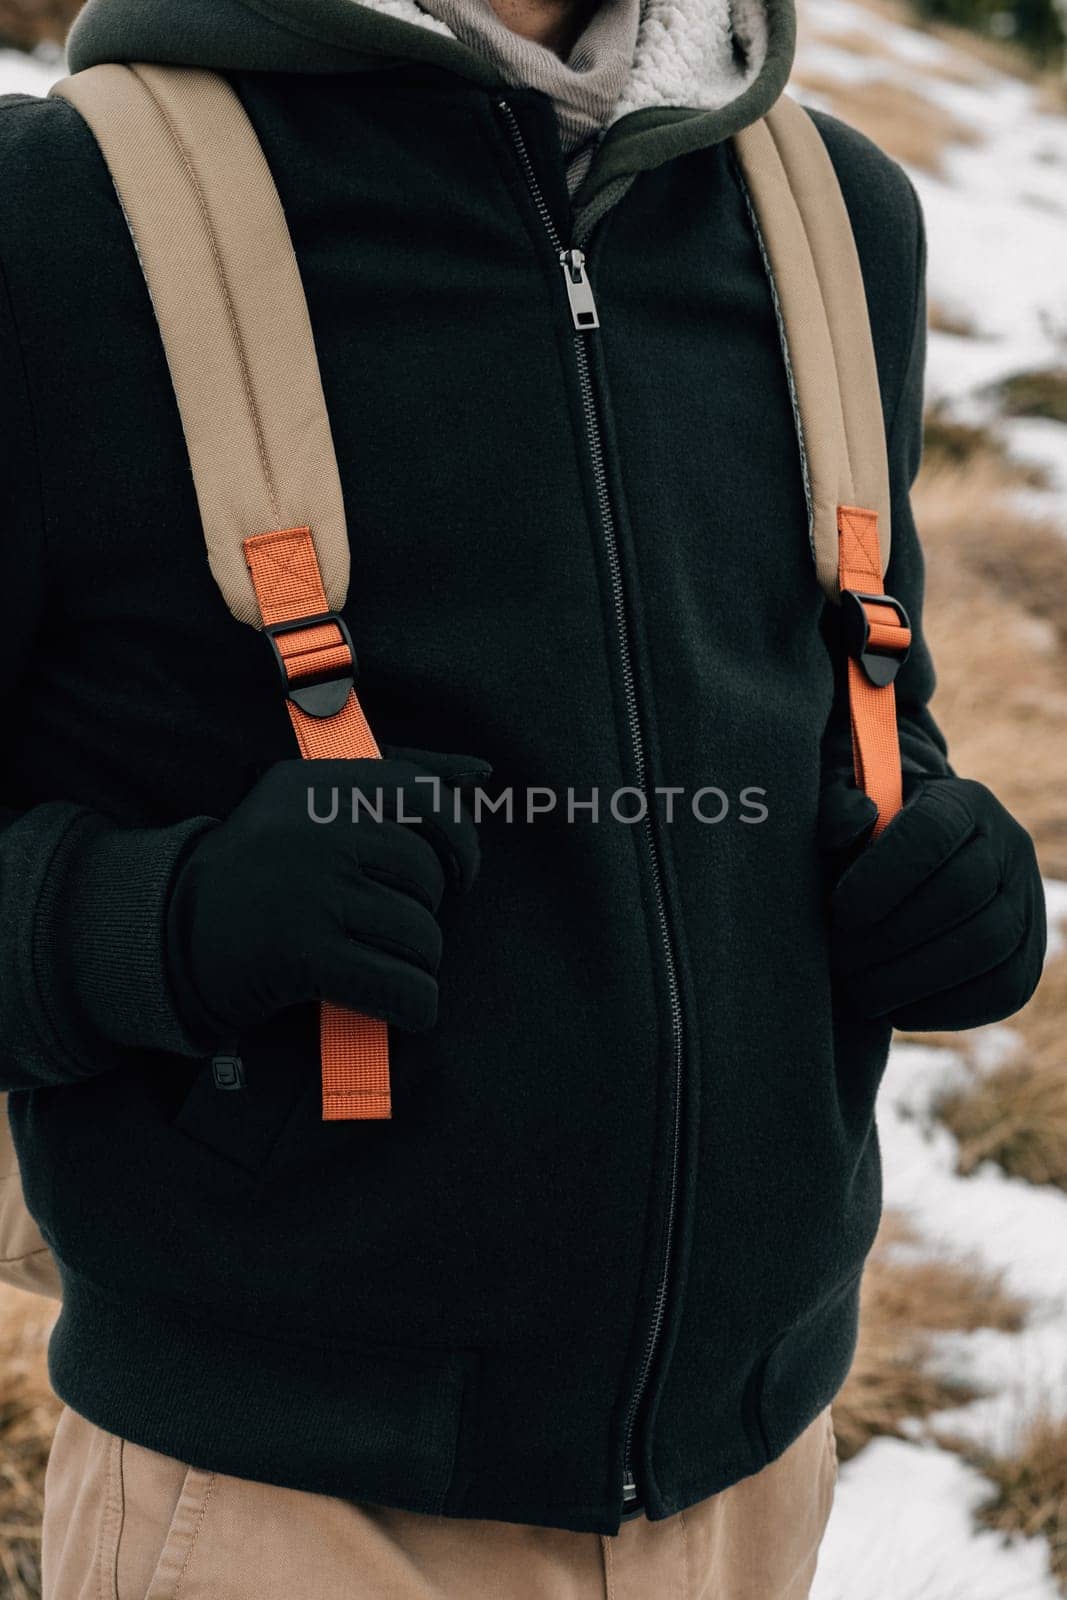 Close-up of a person dressed in winter fashion with a focus on the fleece jacket and backpack straps